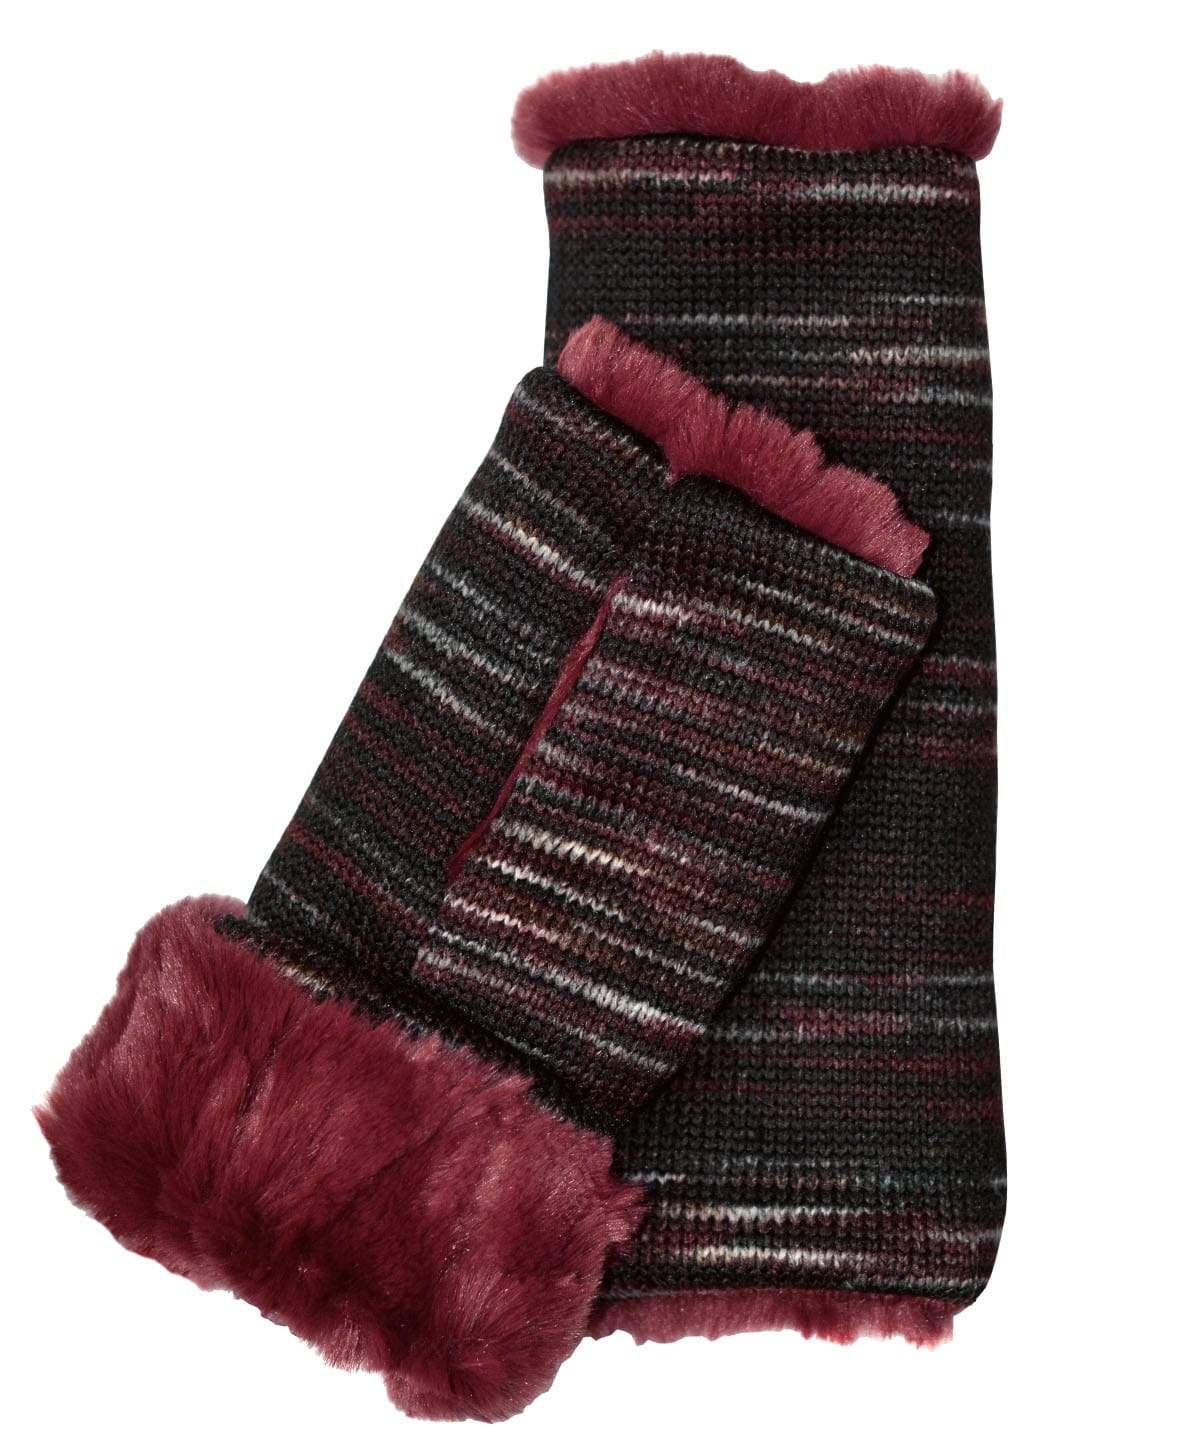 Reversible Fingerless Gloves | Sweet Stripes in Cherry Cordial with Cuddly Black Faux Fur | Pandemonium Millinery